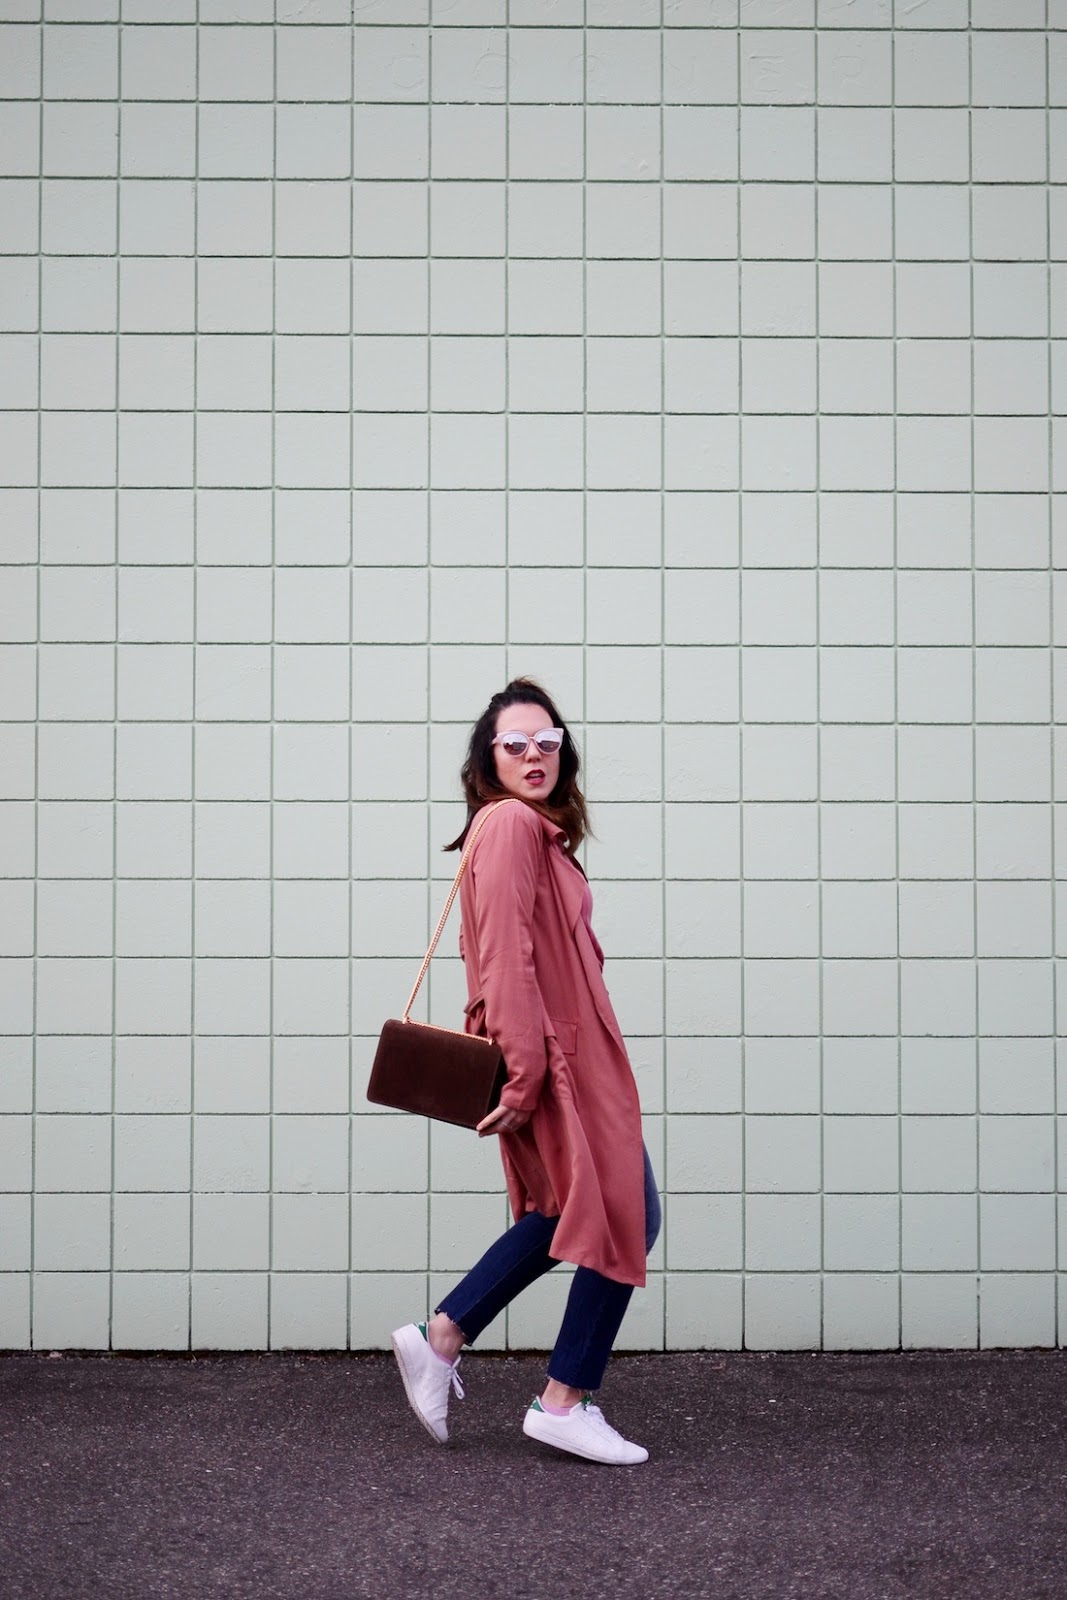 Rose duster jacket forever 21 outfit vancouver fashion blogger AGNEEL sophie bag brown suede